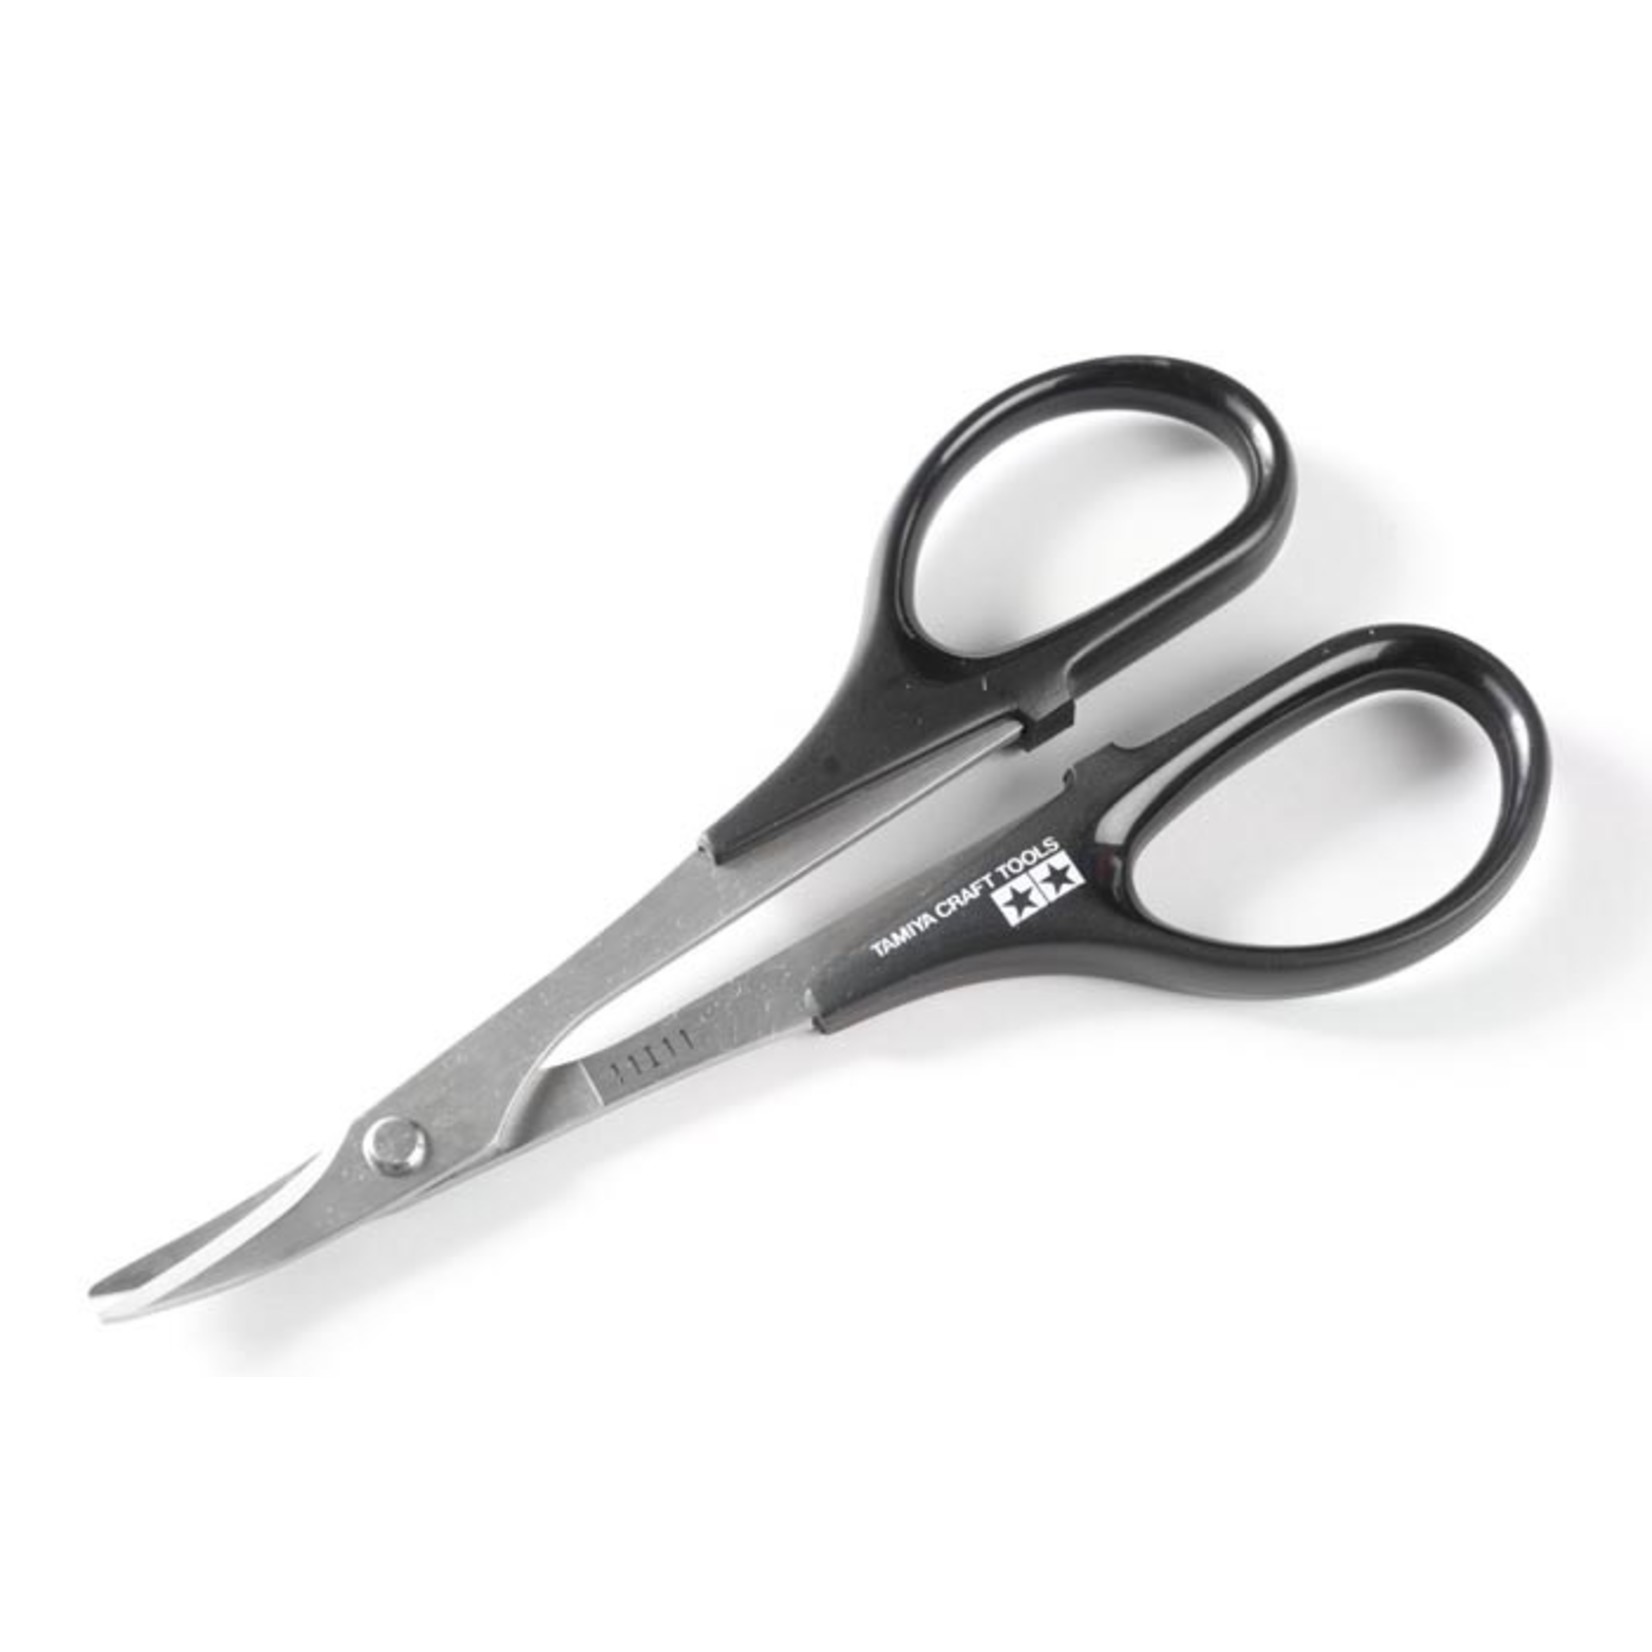 Tamiya Curved Scissors for Plastic - Hard Knox Games